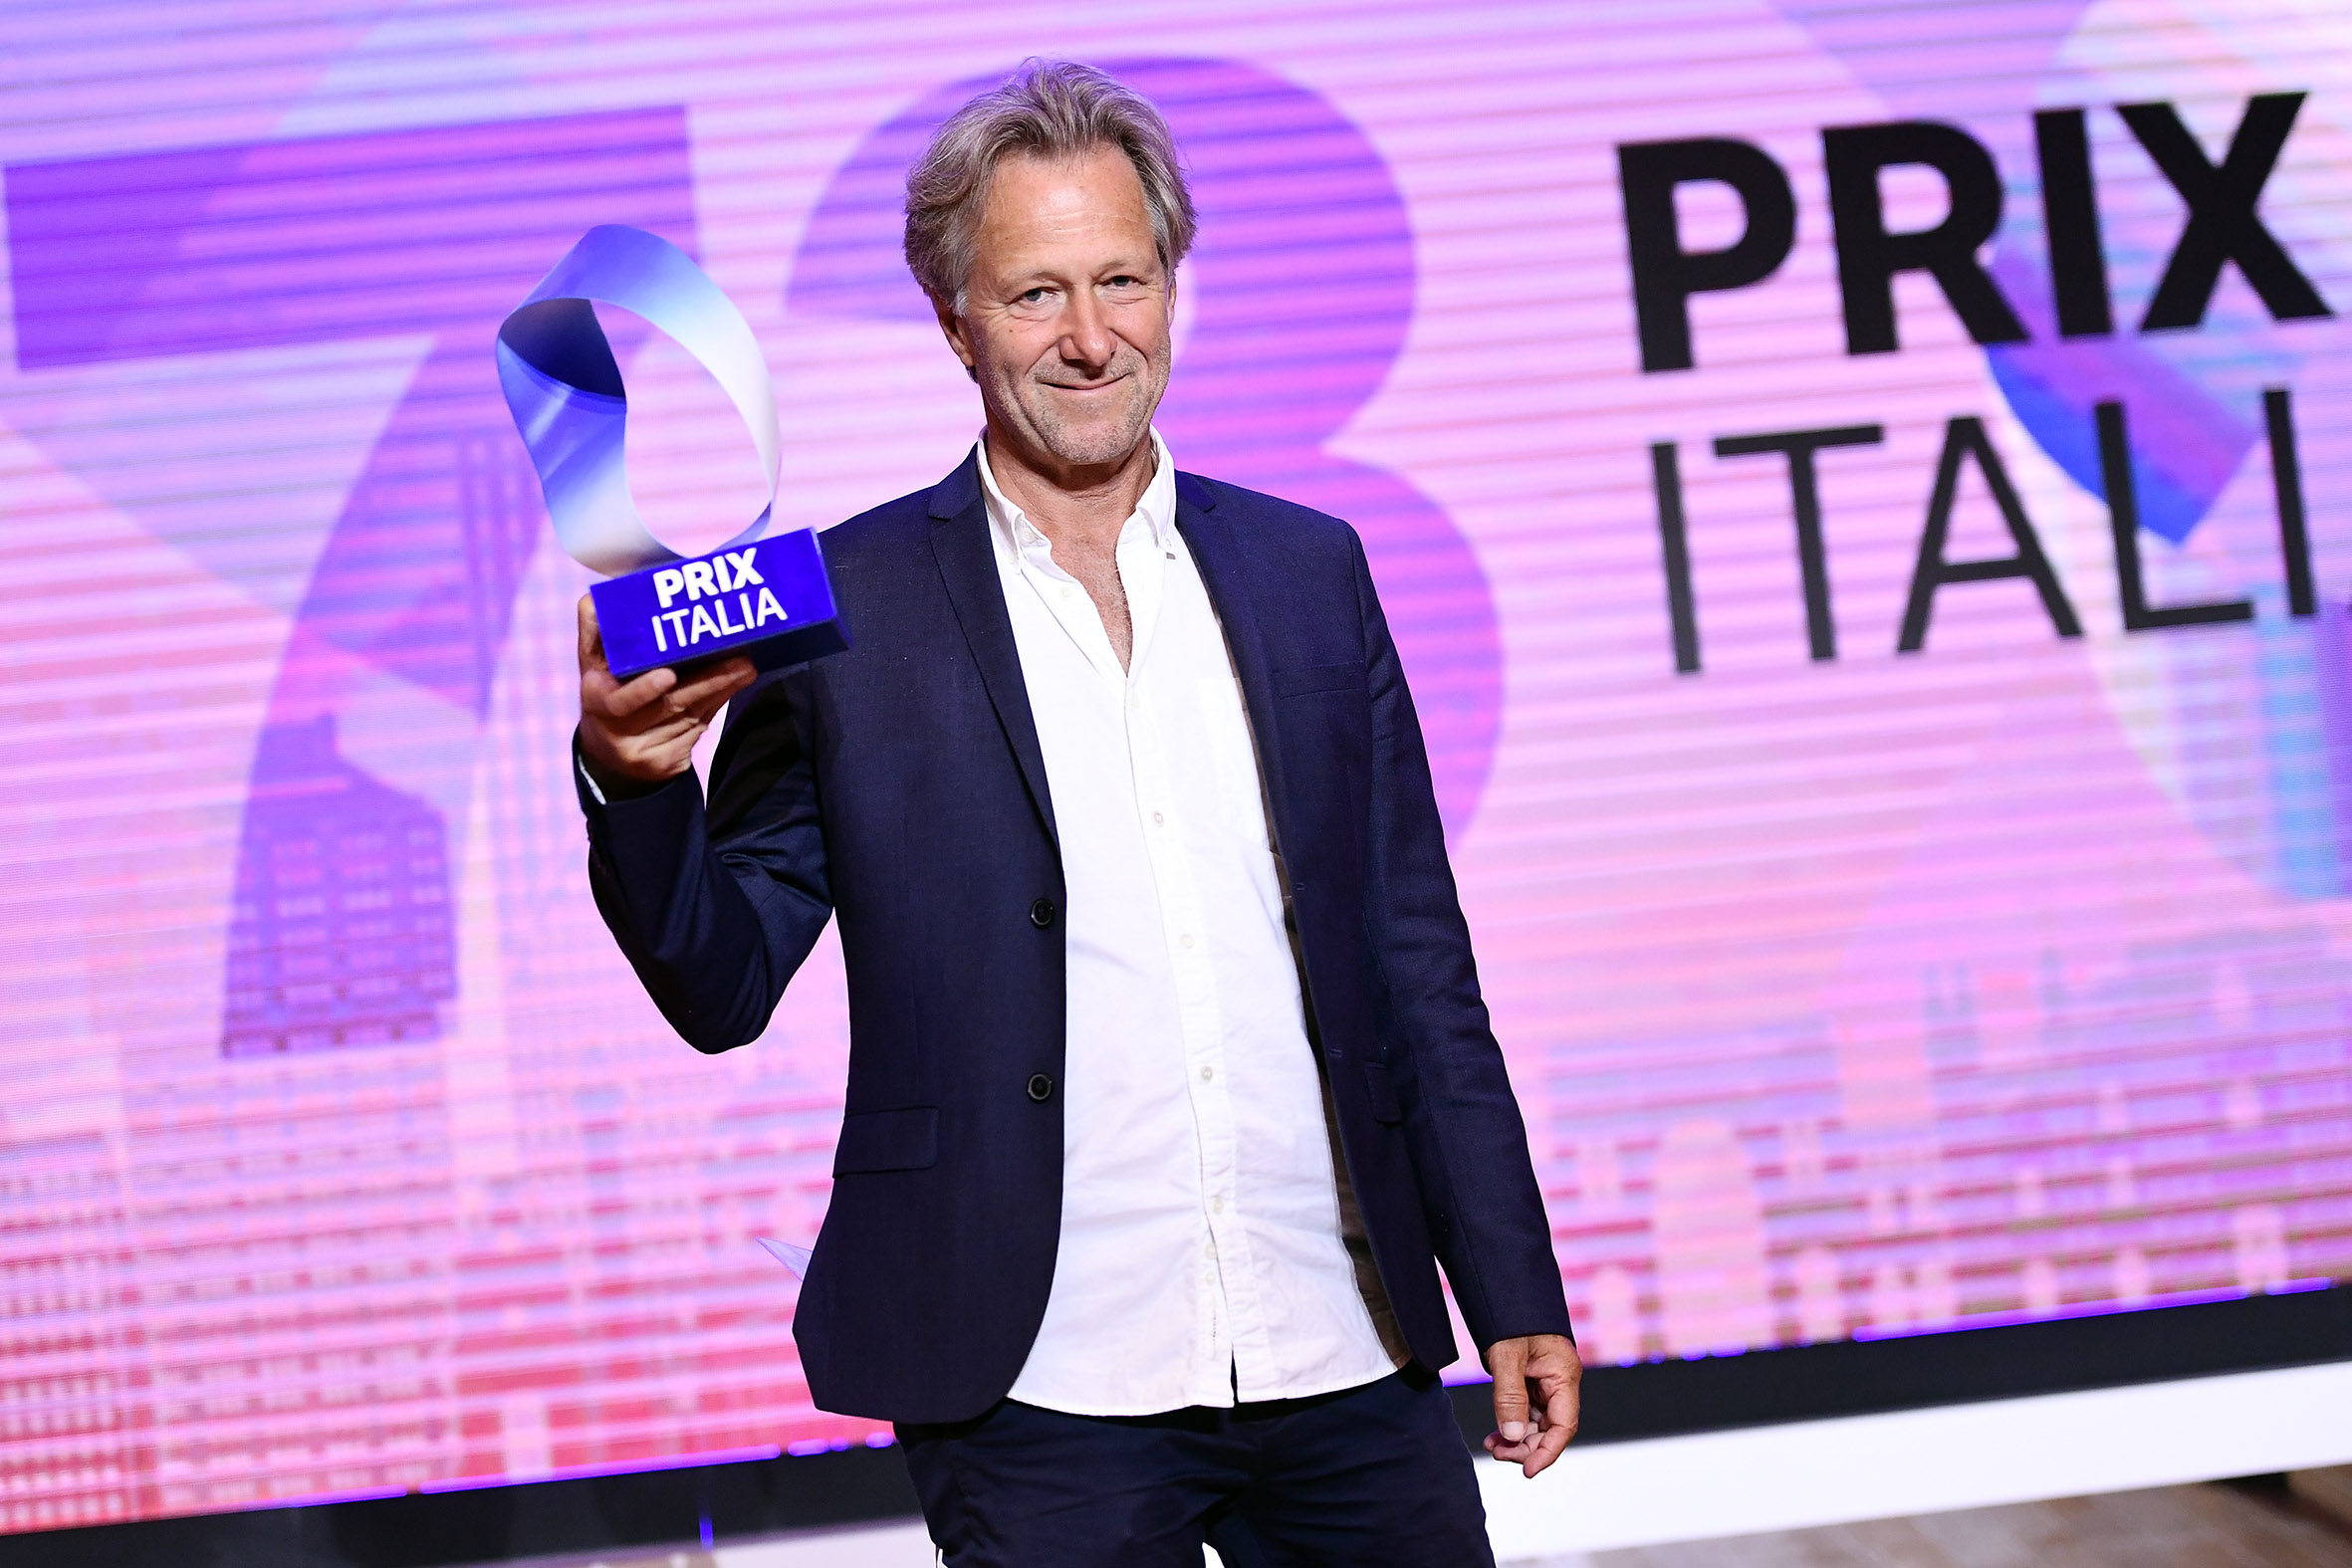 Fredrik Gertten with the SIGNIS Award for Push